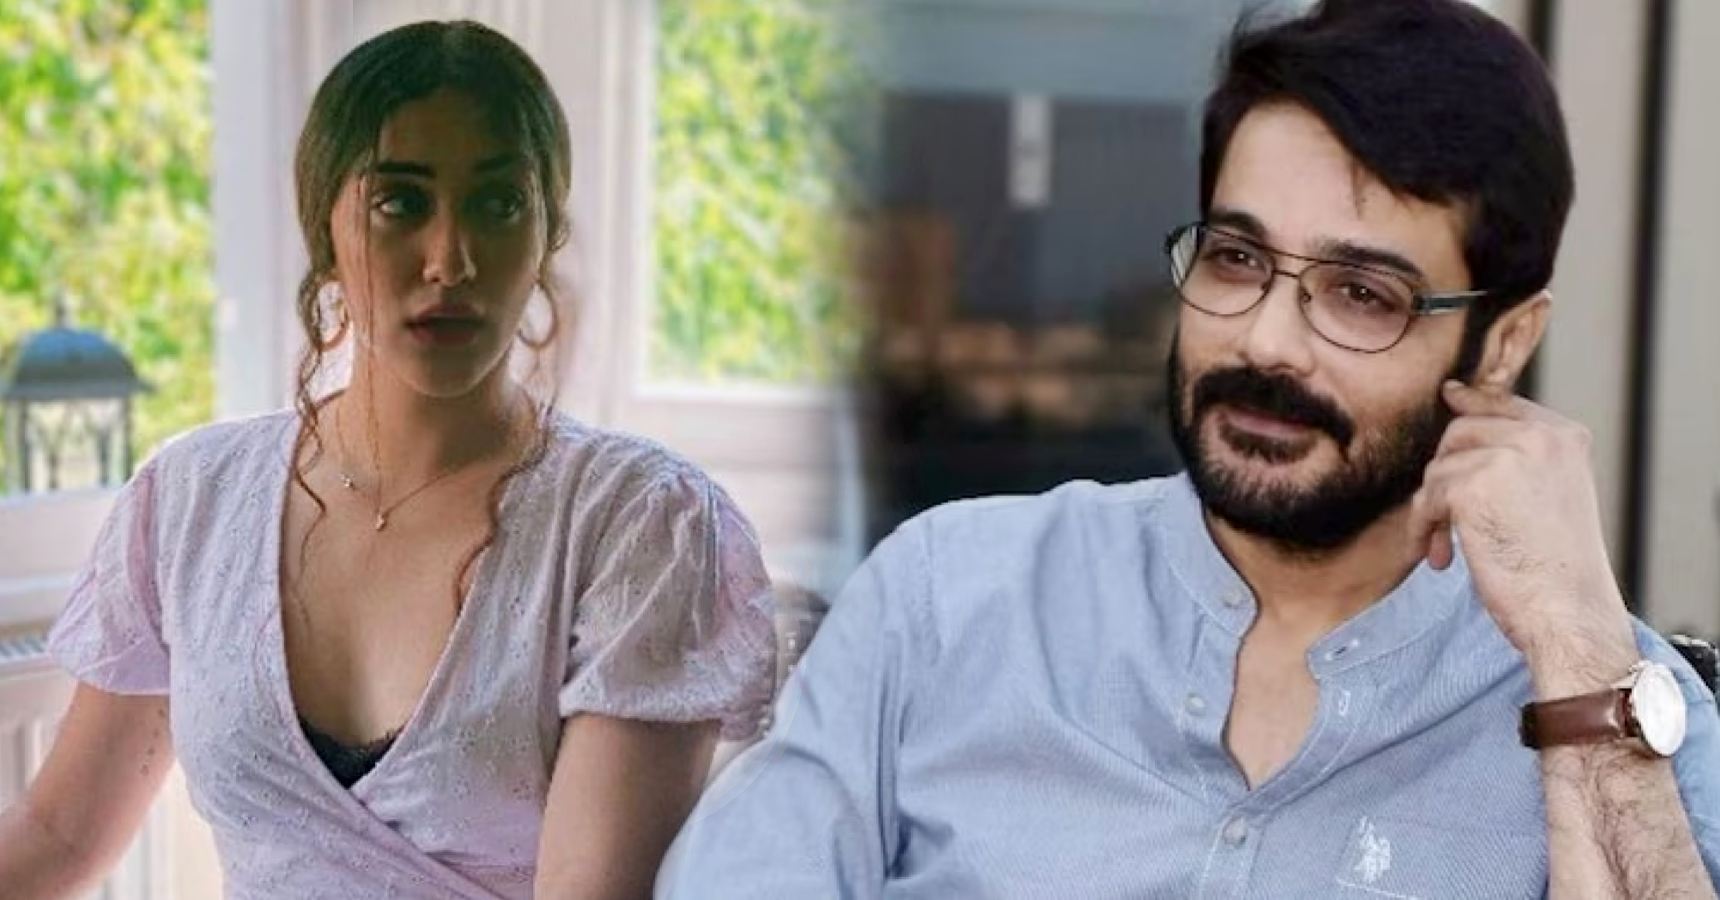 All you need to know about Prosenjit Chatterjee daughter Prorona Chatterjee